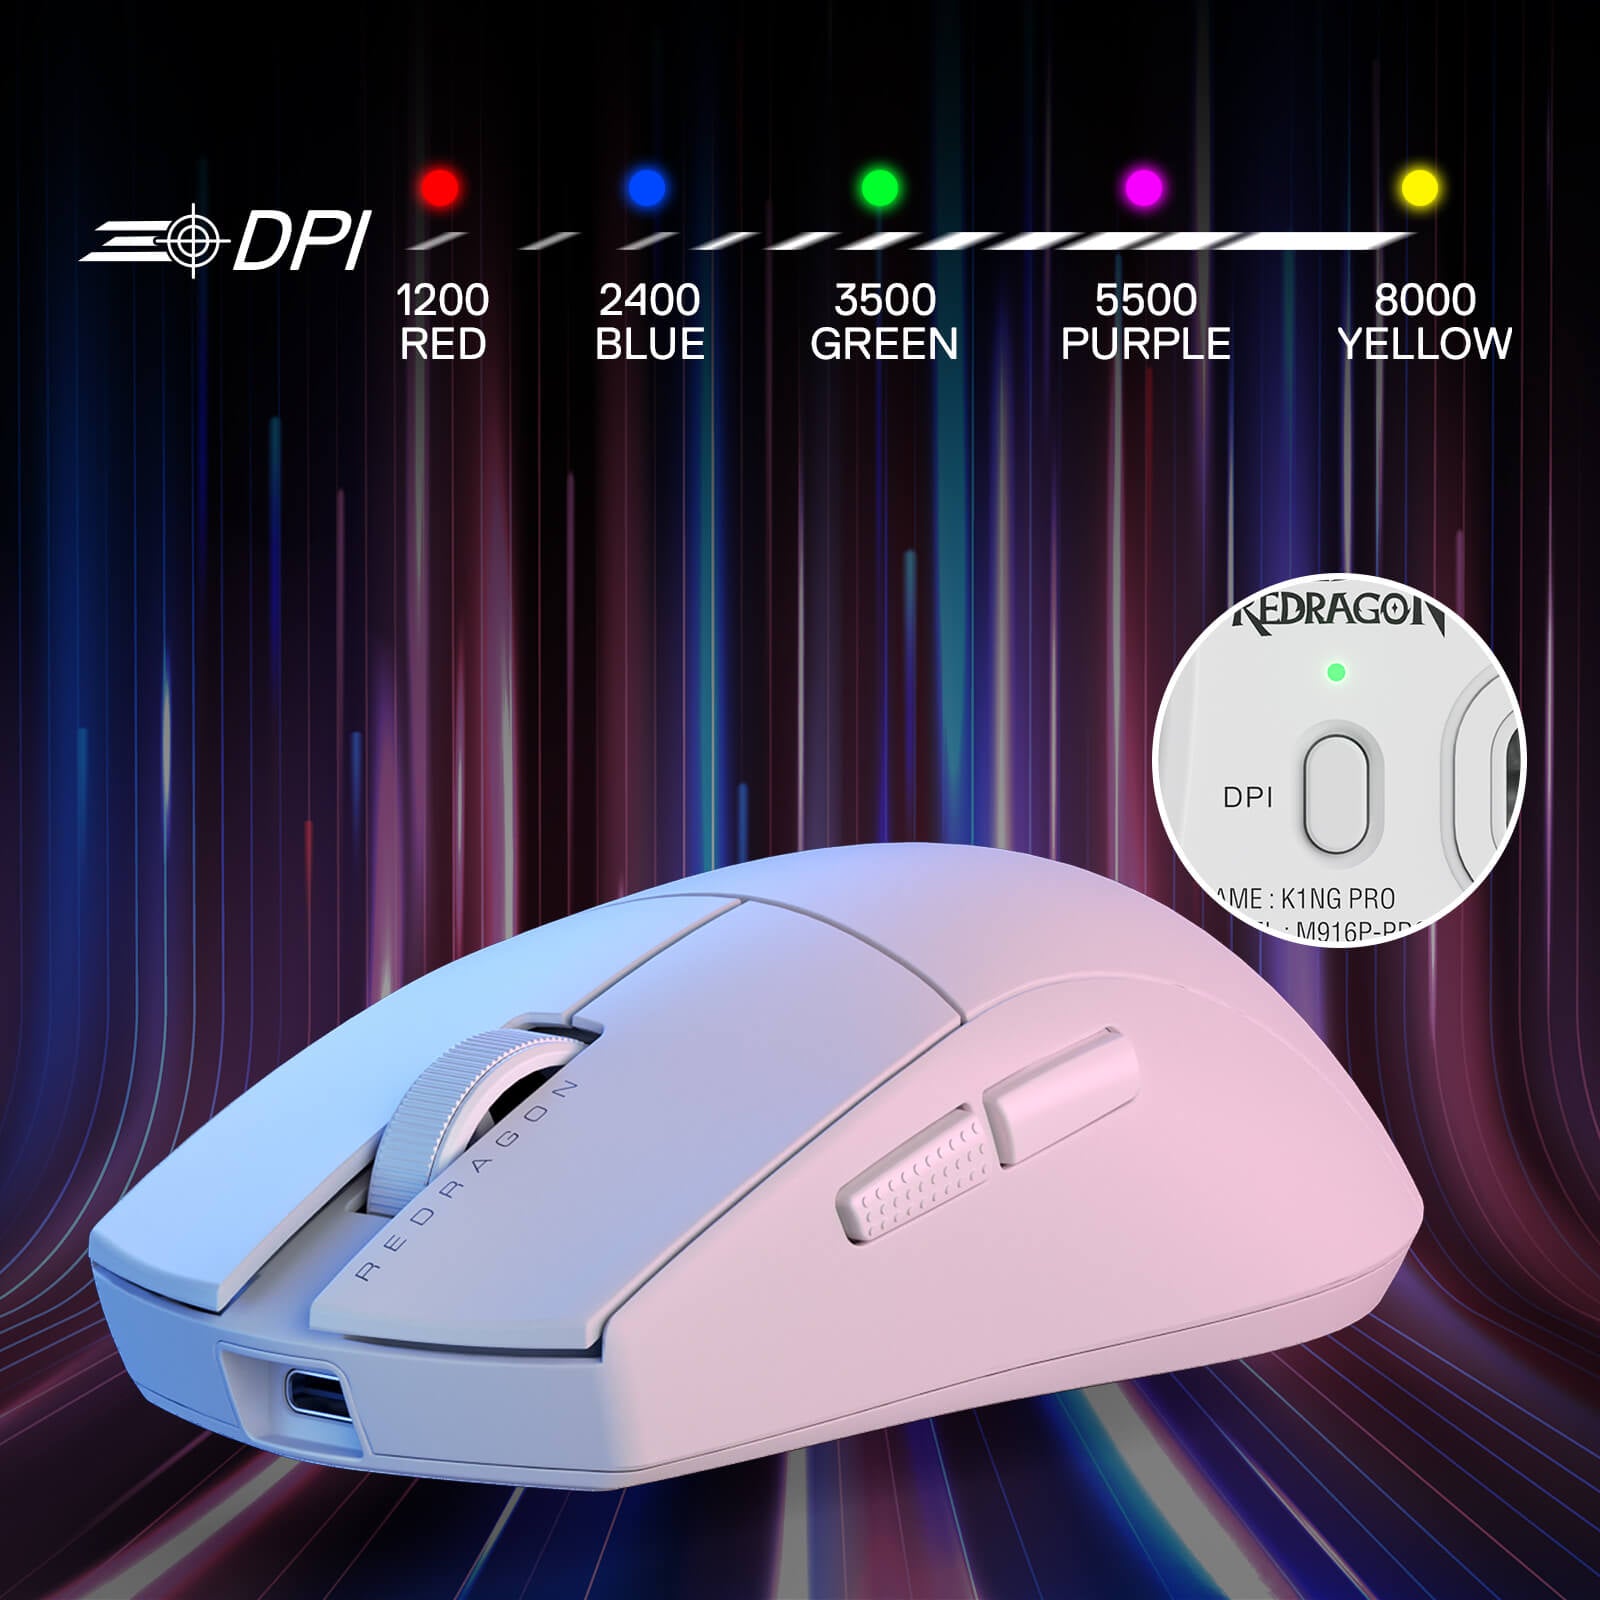 Redragon M916 Wireless Gaming Mouse, 49G Ultra-Light 8K DPI 2.4G Wireless Gaming Mouse w/Ergonomic Natural Grip Build, Full Programmable Buttons, Software Supports DIY Keybinds & DPI